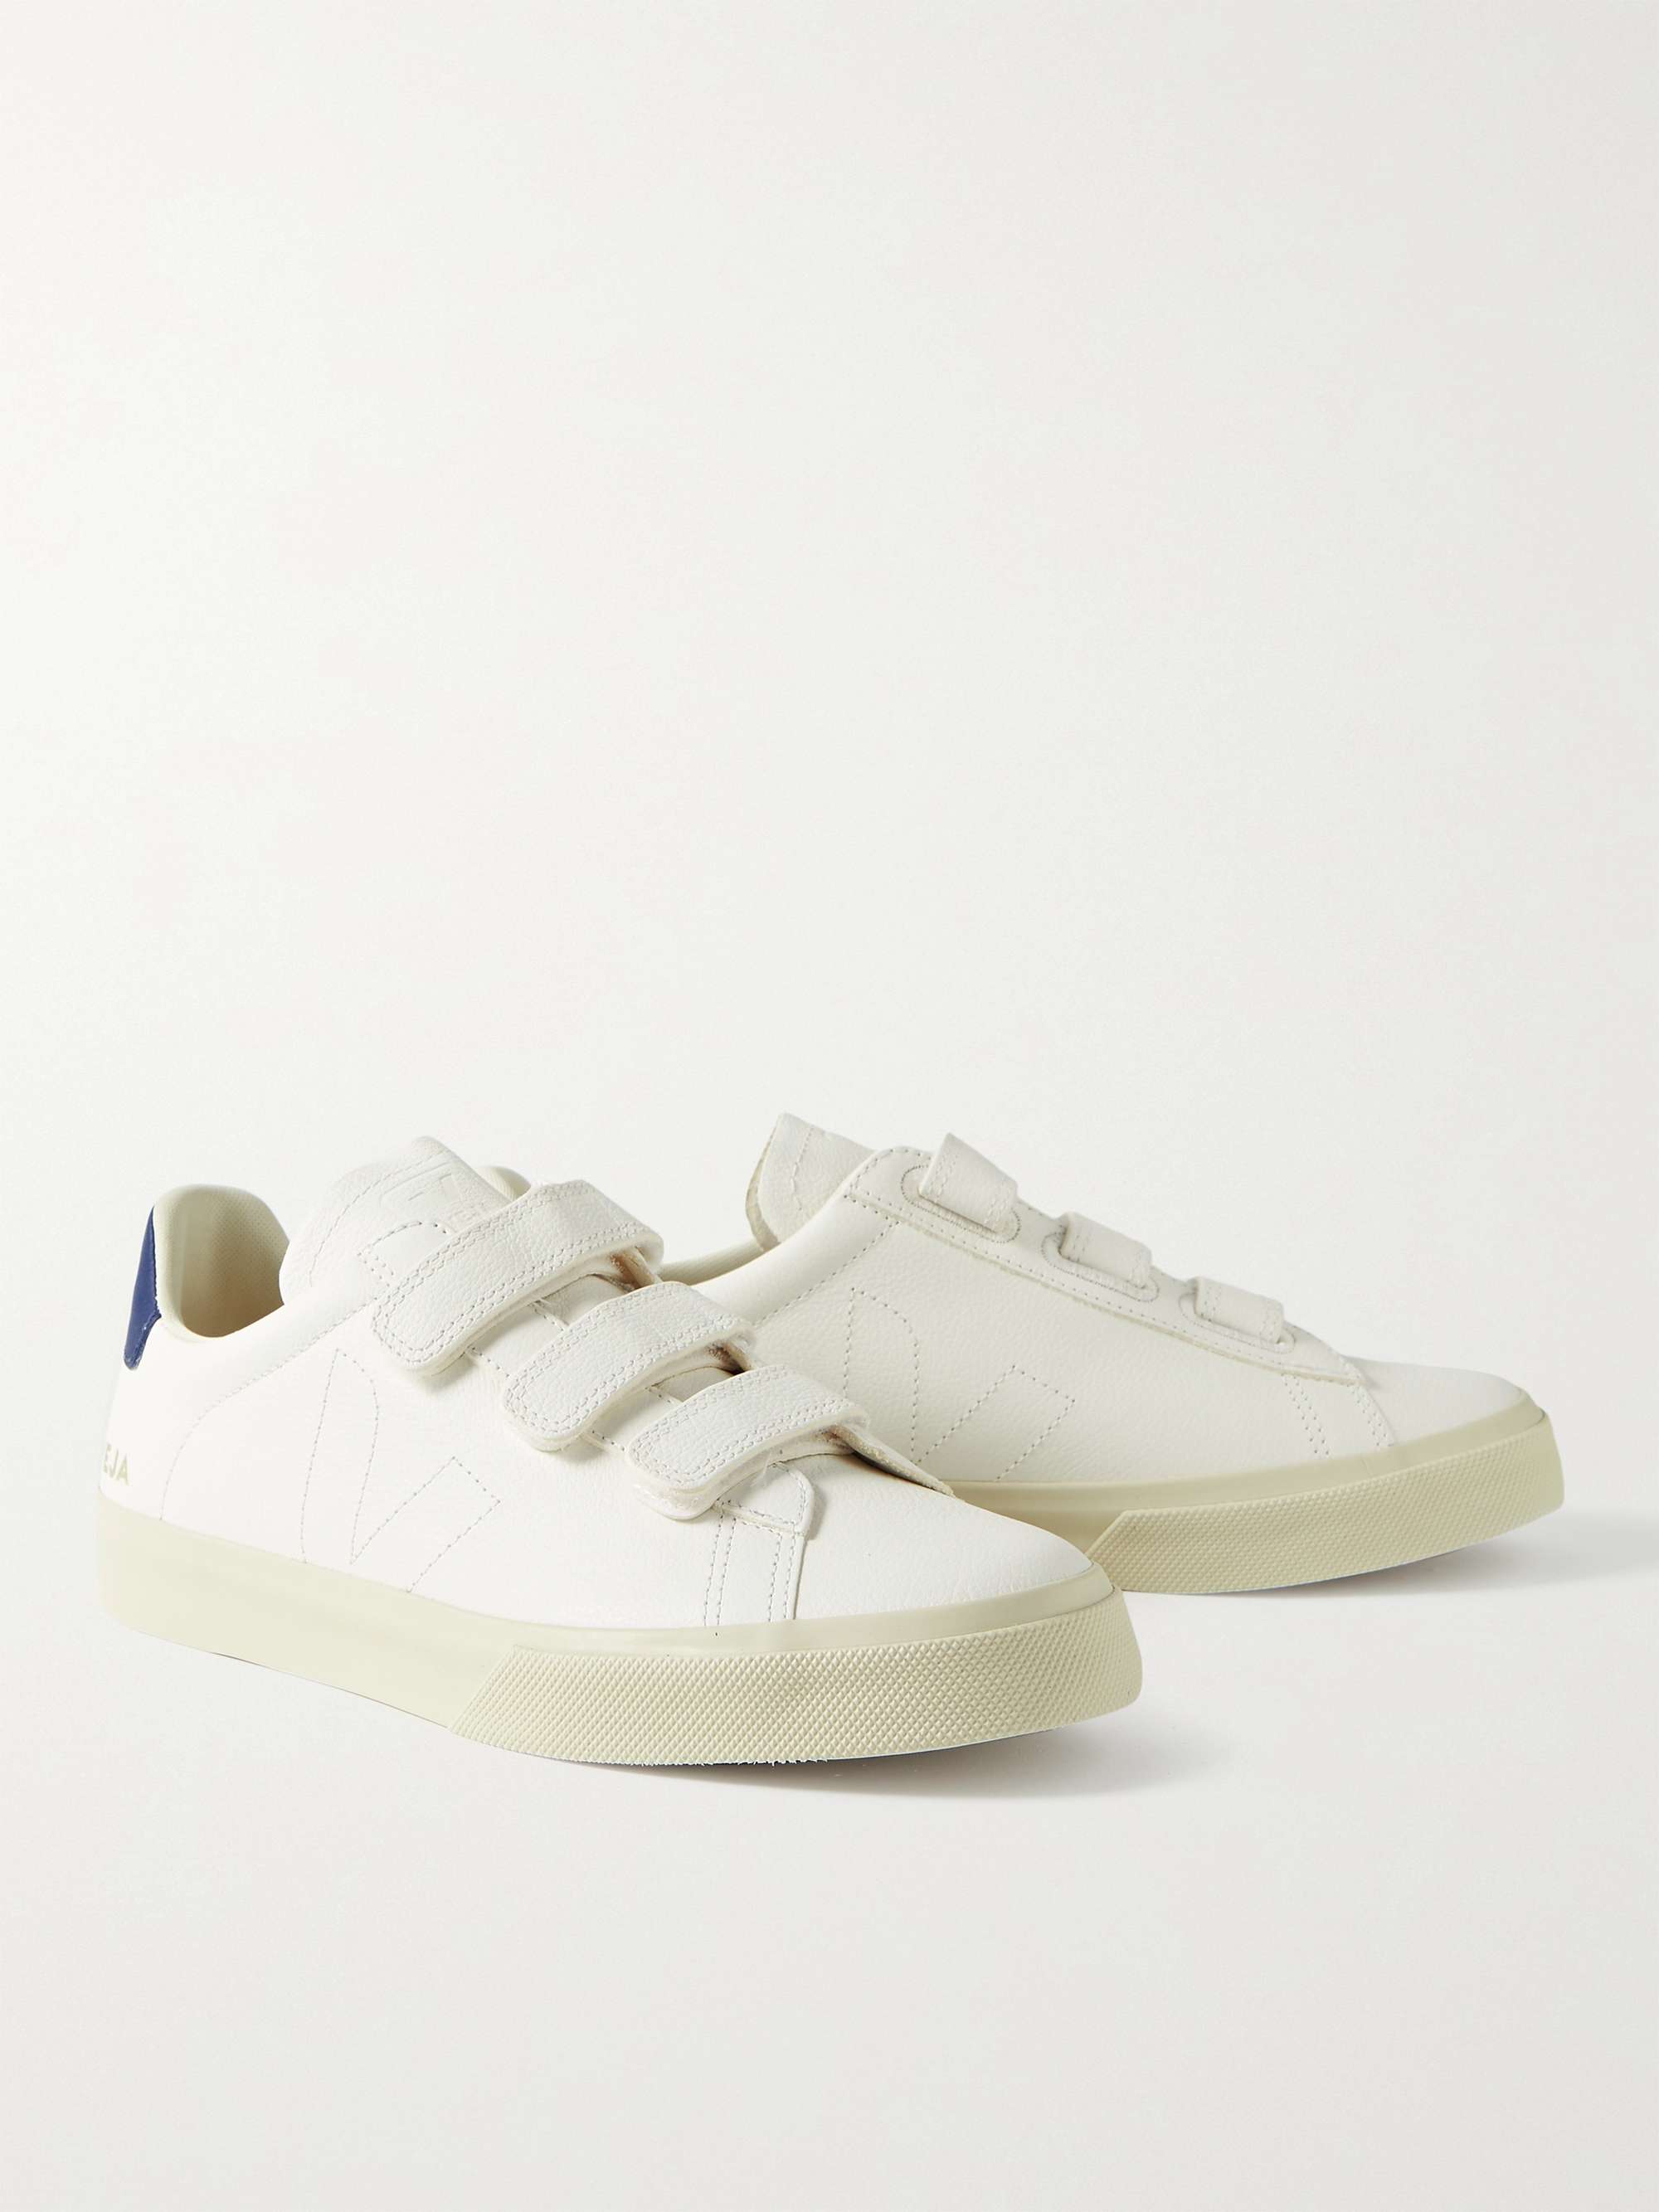 VEJA Recife Leather Sneakers